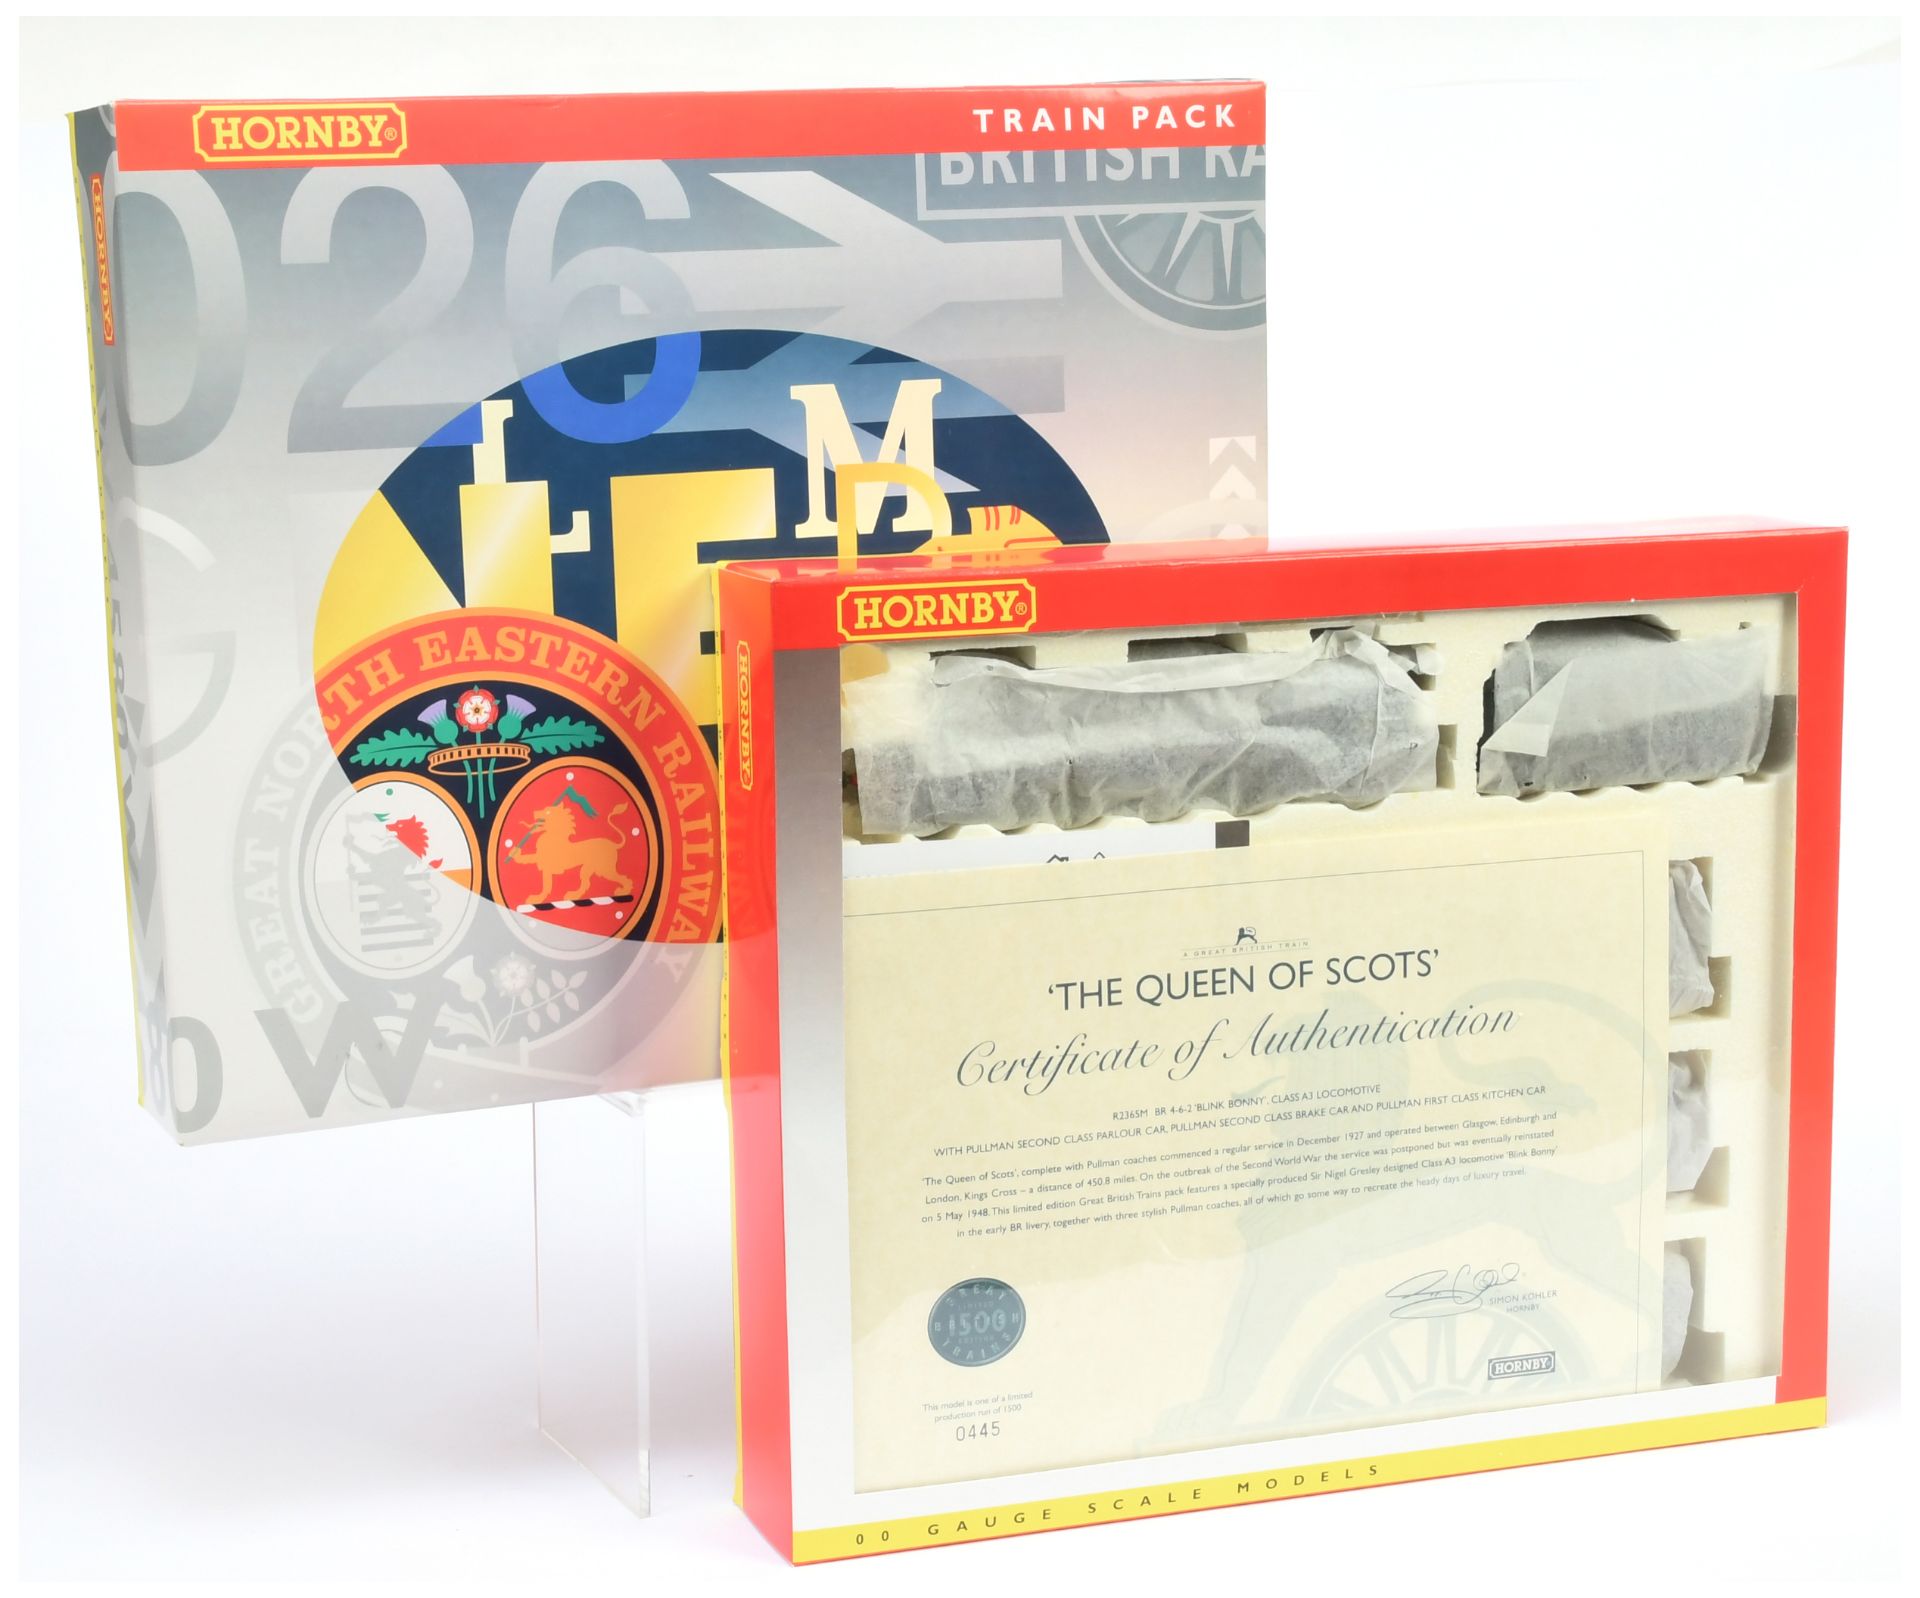 Hornby (China) R2365M (limited edition) "The Queen of Scots" Train pack